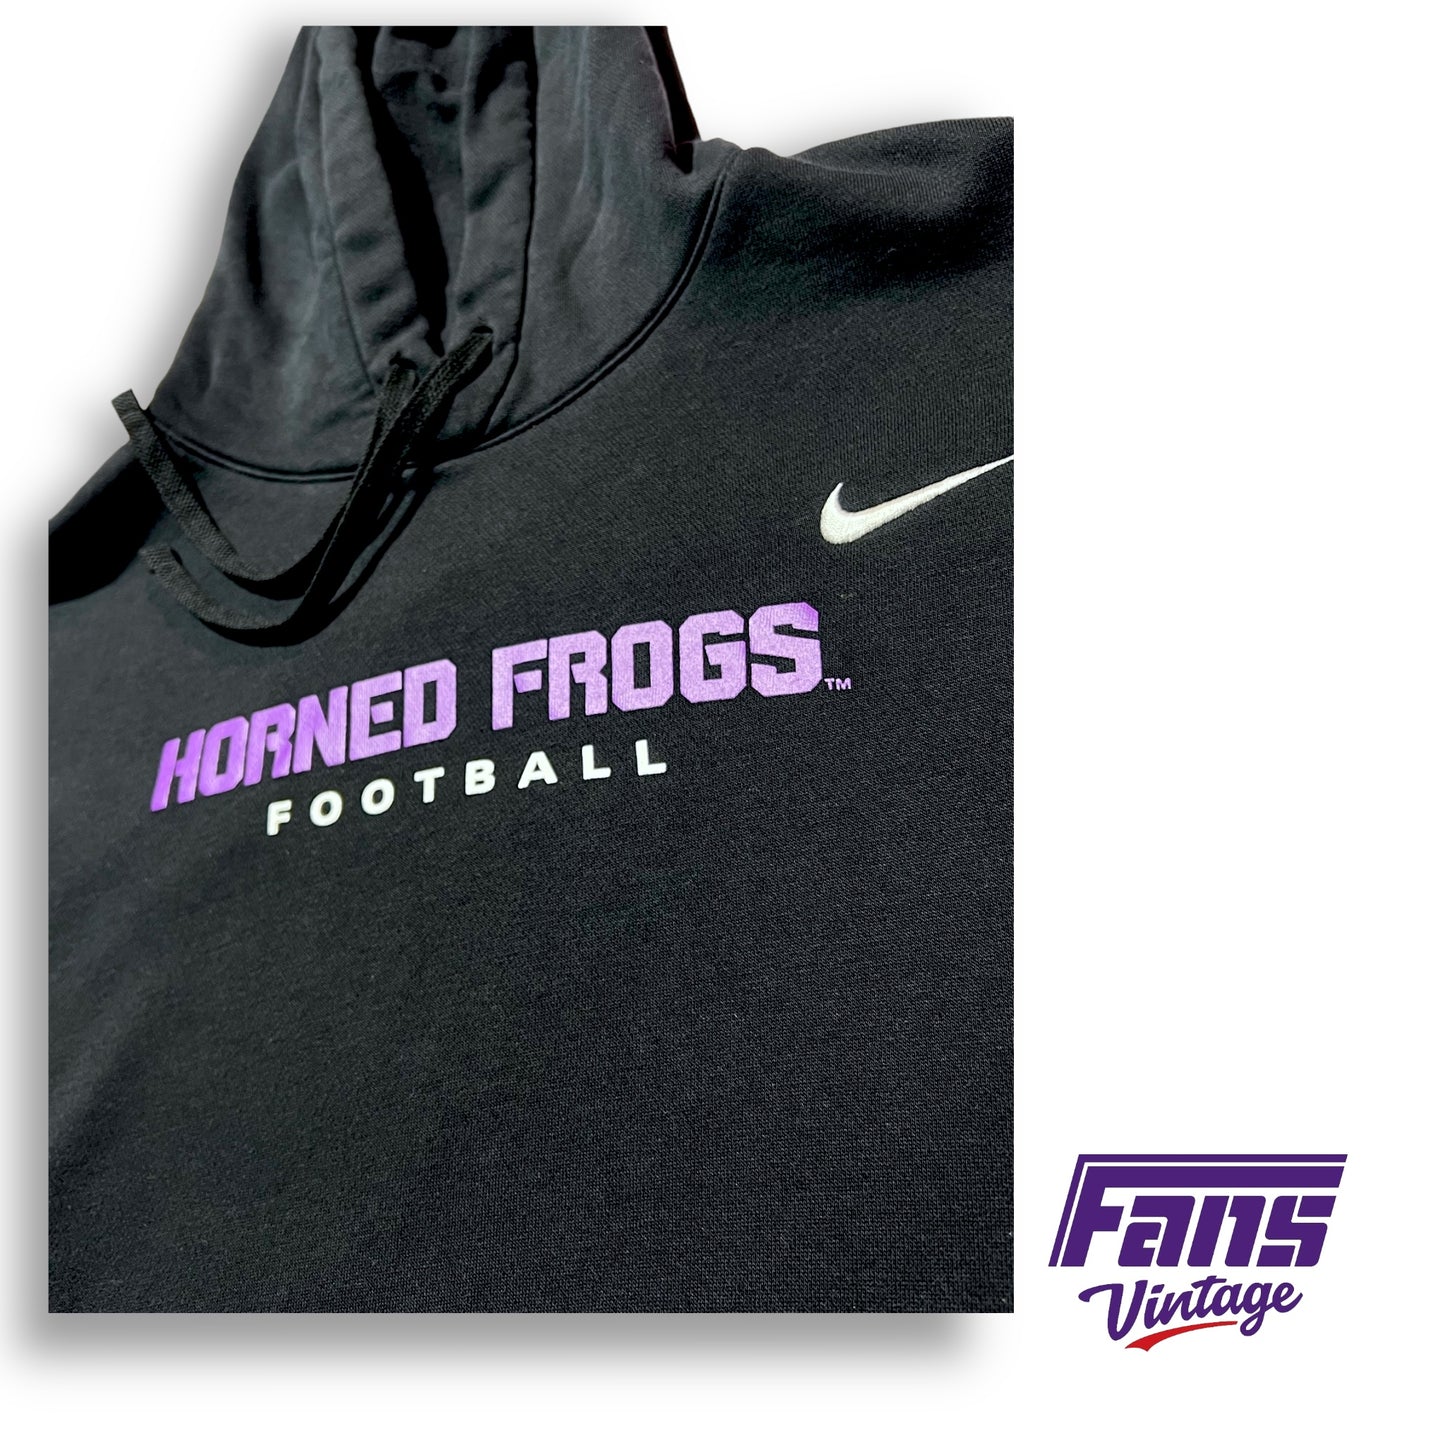 RARE - TCU Football Team Exclusive Premium Nike Sportswear Hoodie “Horned Frogs Football” two color graphic